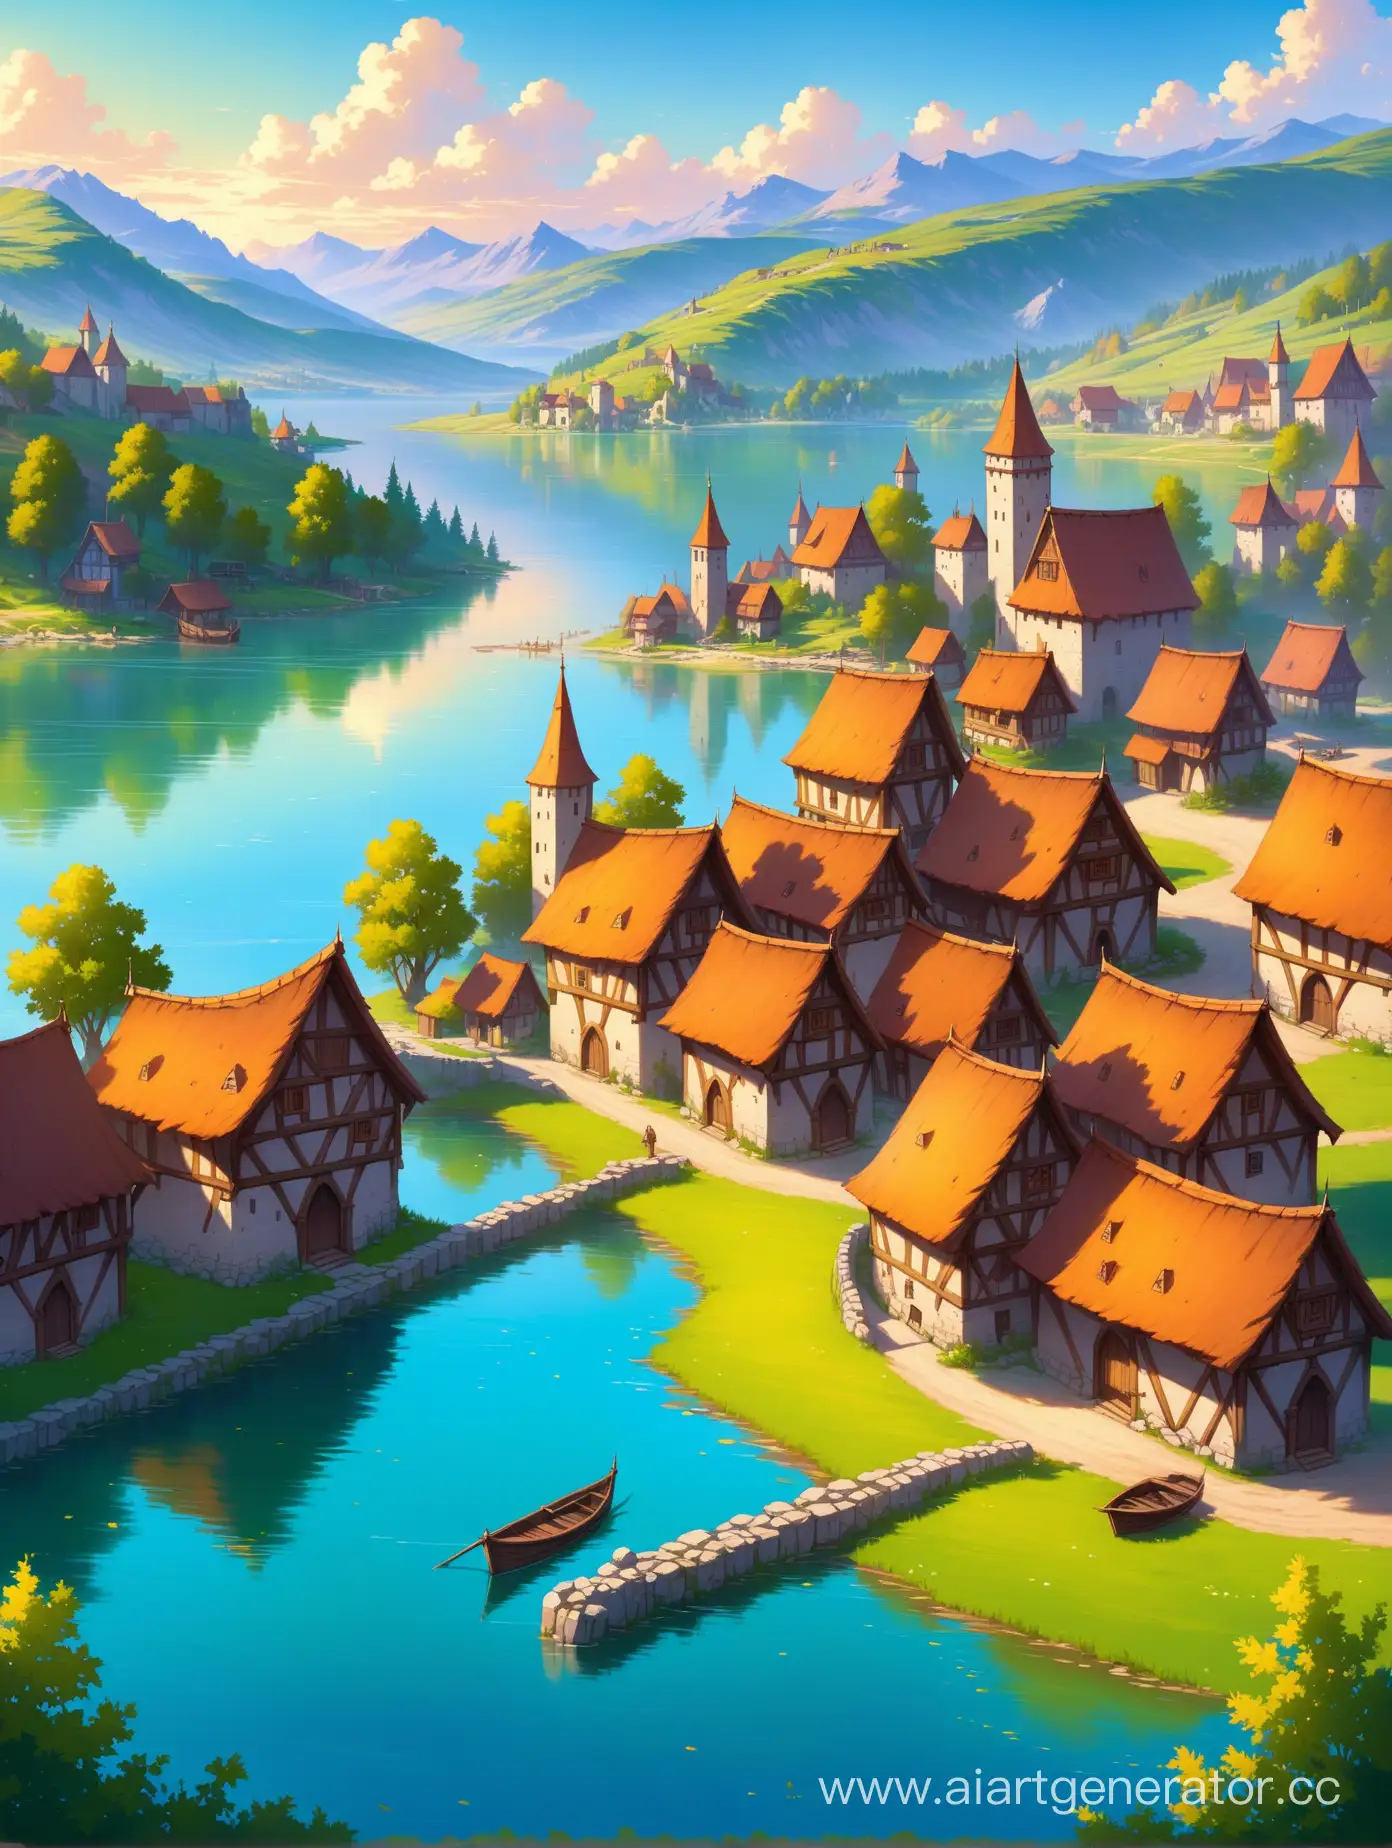 Enchanting-Medieval-Village-by-the-Tranquil-Lake-Fantasy-Art